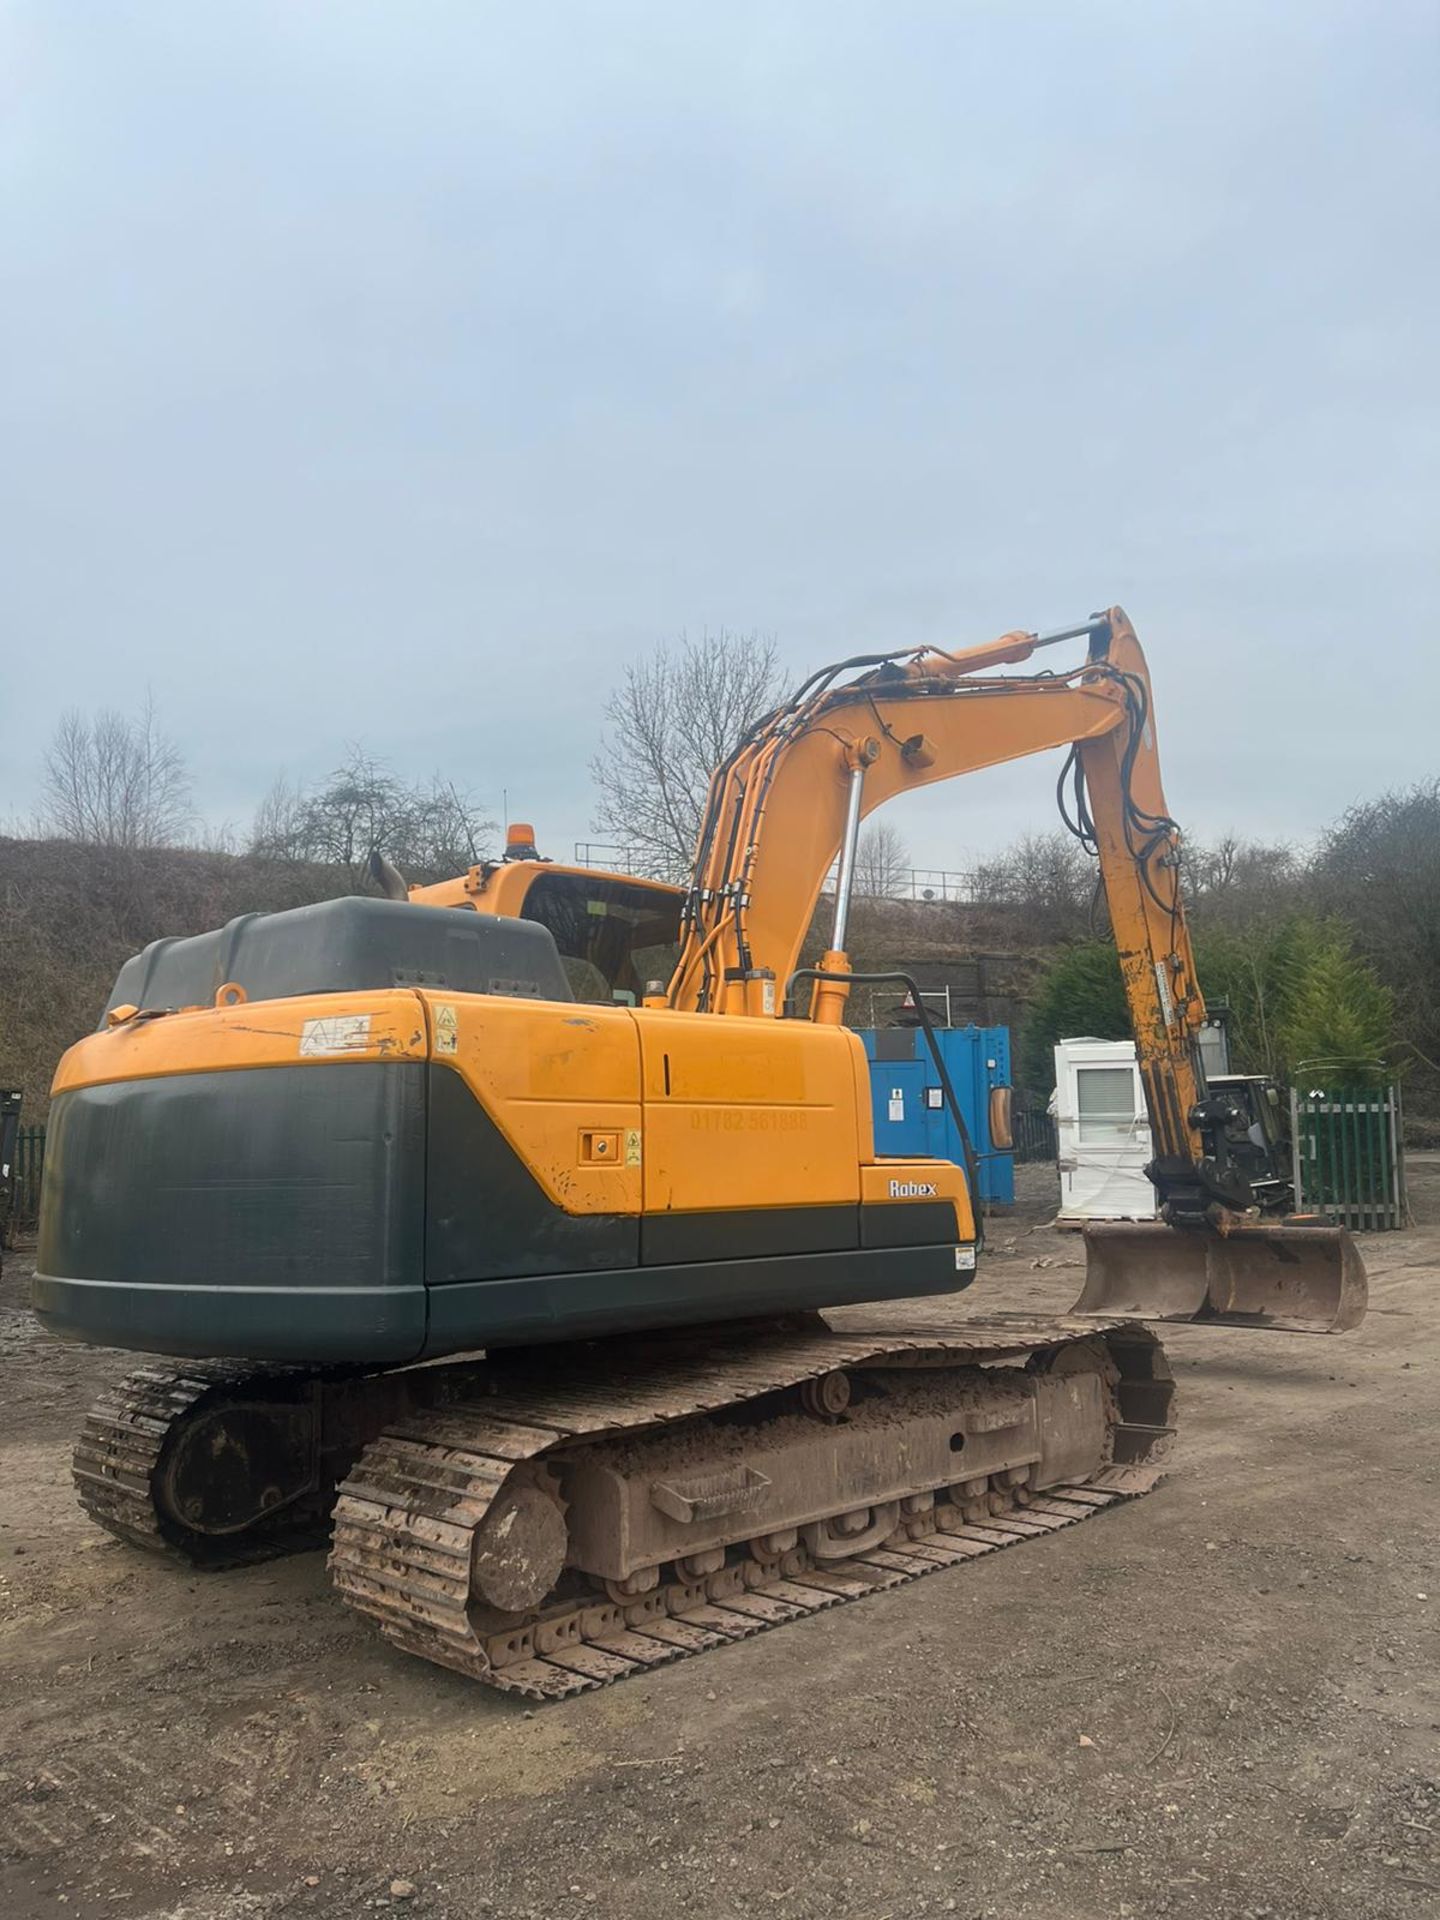 HYUNDAI ROBEX 140LC-9A 14 TON EXCAVATOR, RUNS WORKS AND DIGS, QIUCK HITCH, YEAR 2015 *PLUS VAT* - Image 6 of 12